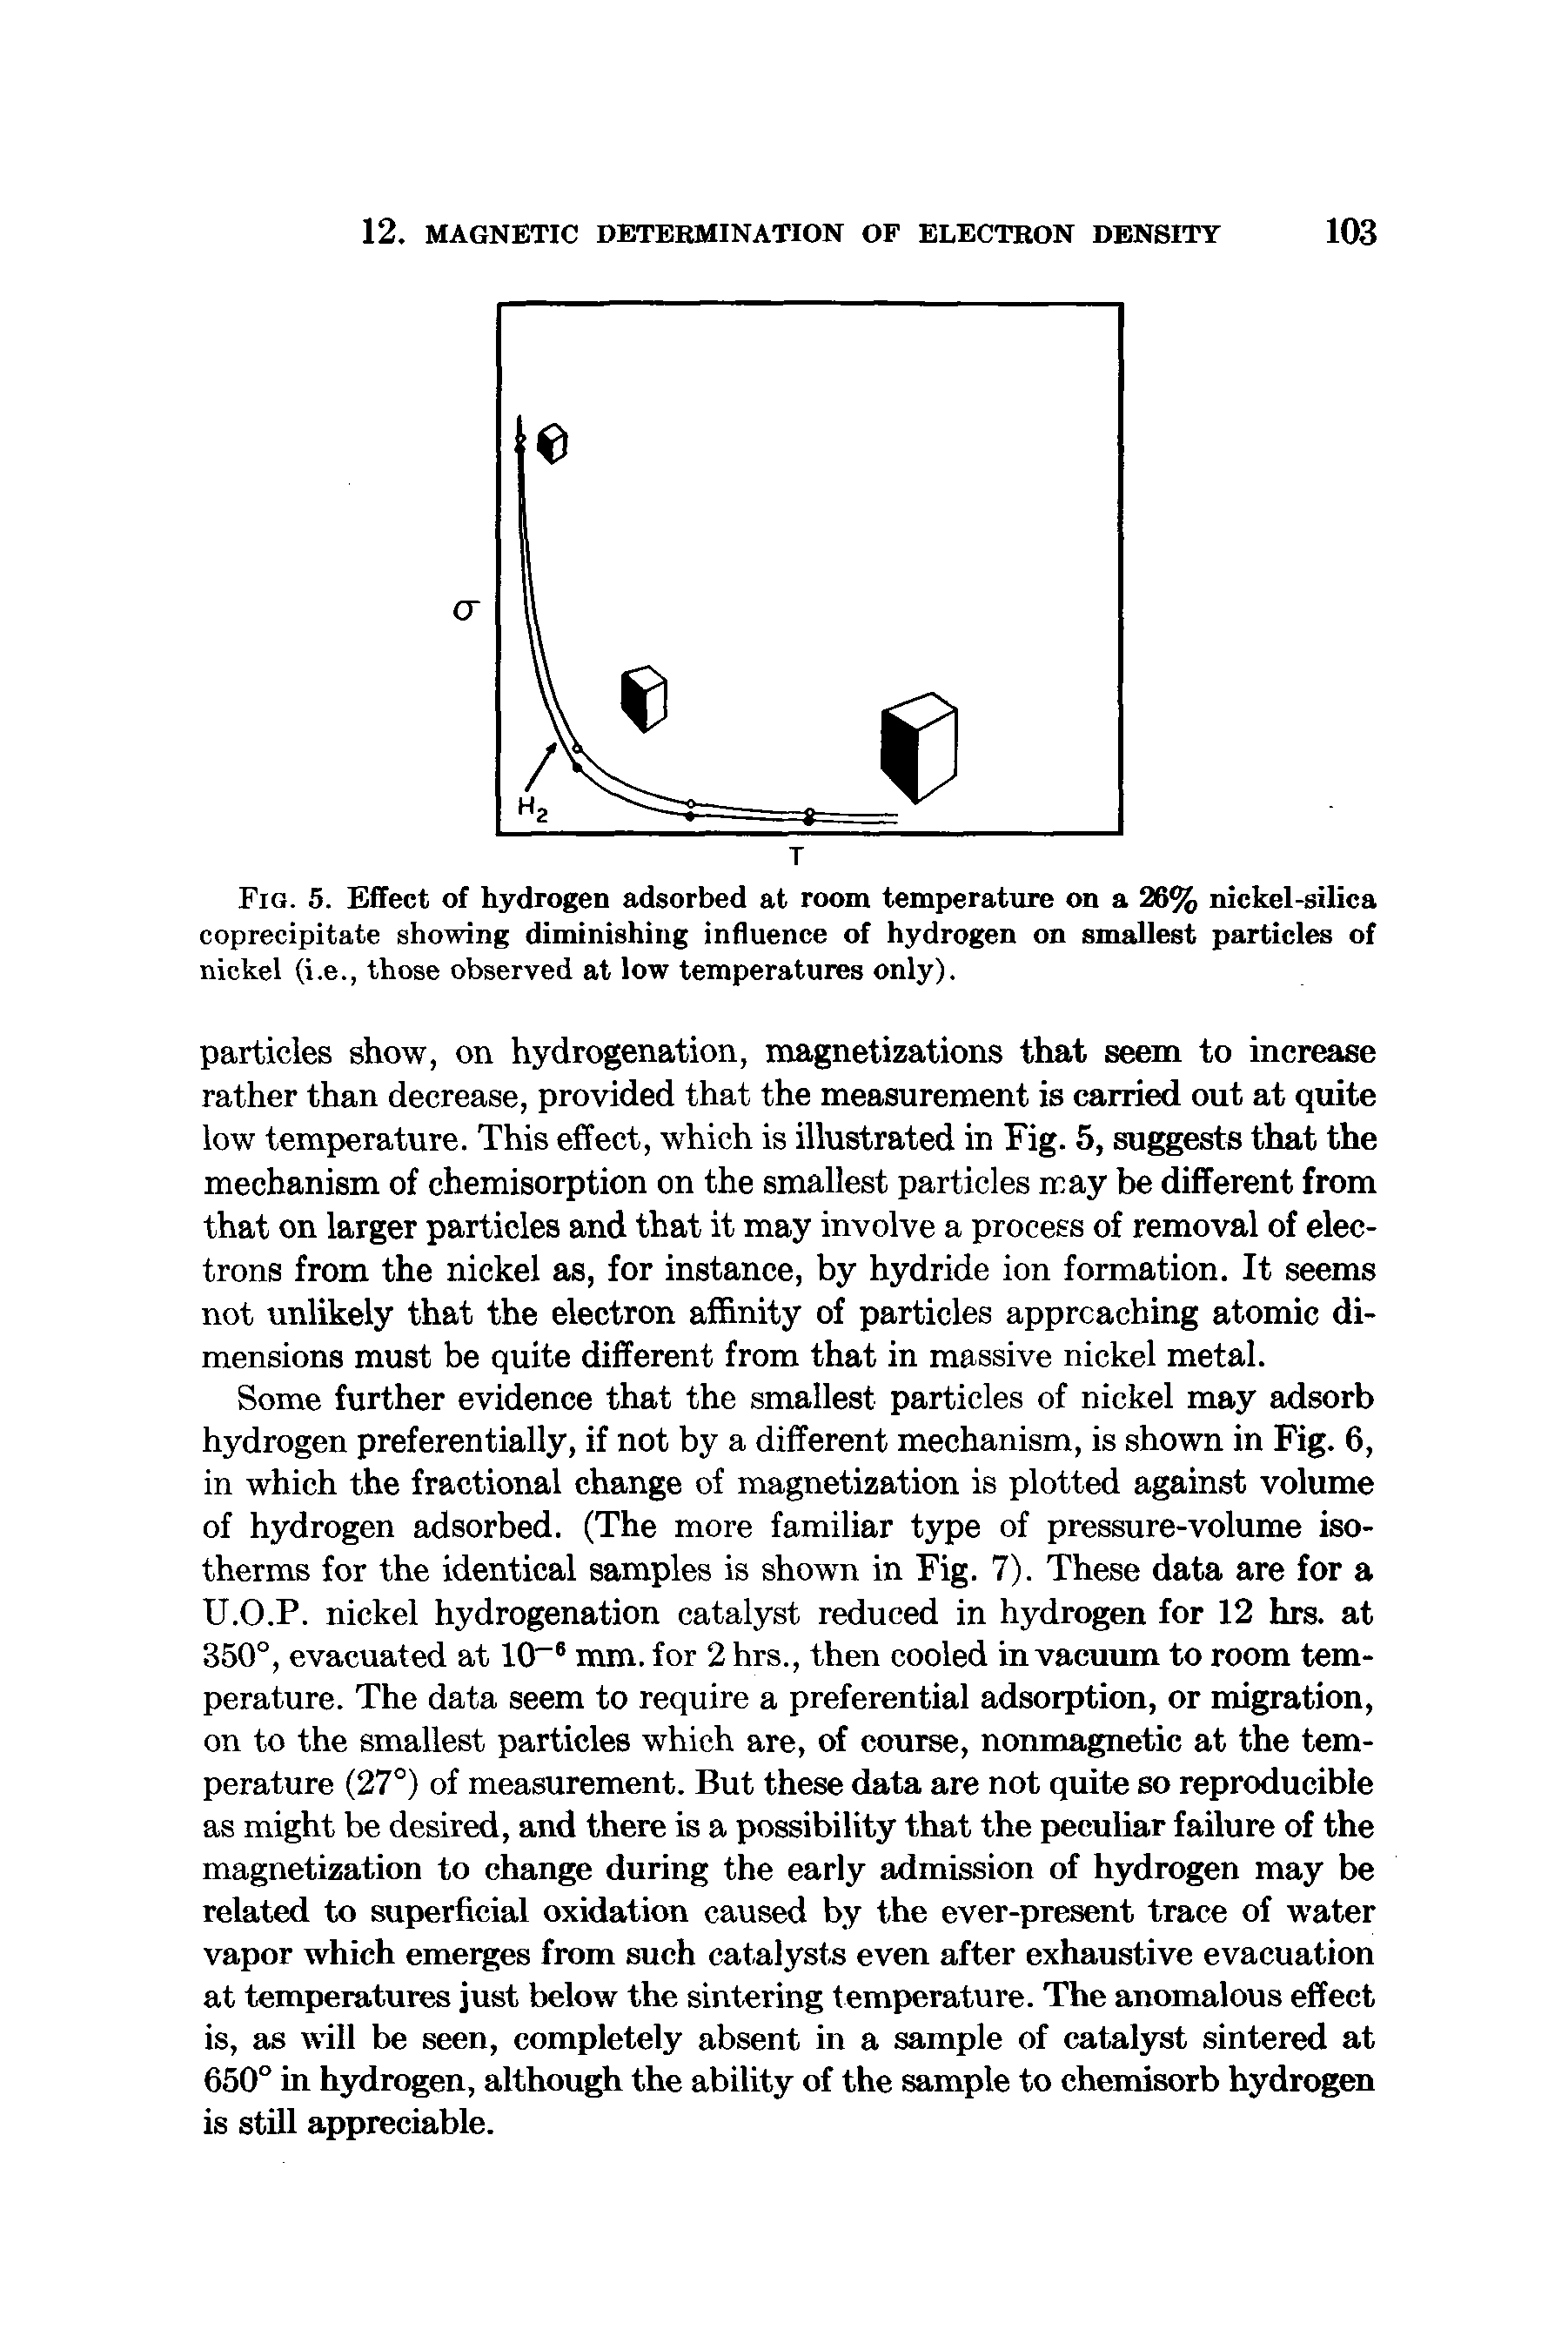 Fig. 5. Effect of hydrogen adsorbed at room temperature on a 26% nickel-silica coprecipitate showing diminishing influence of hydrogen on smallest particles of nickel (i.e., those observed at low temperatures only).